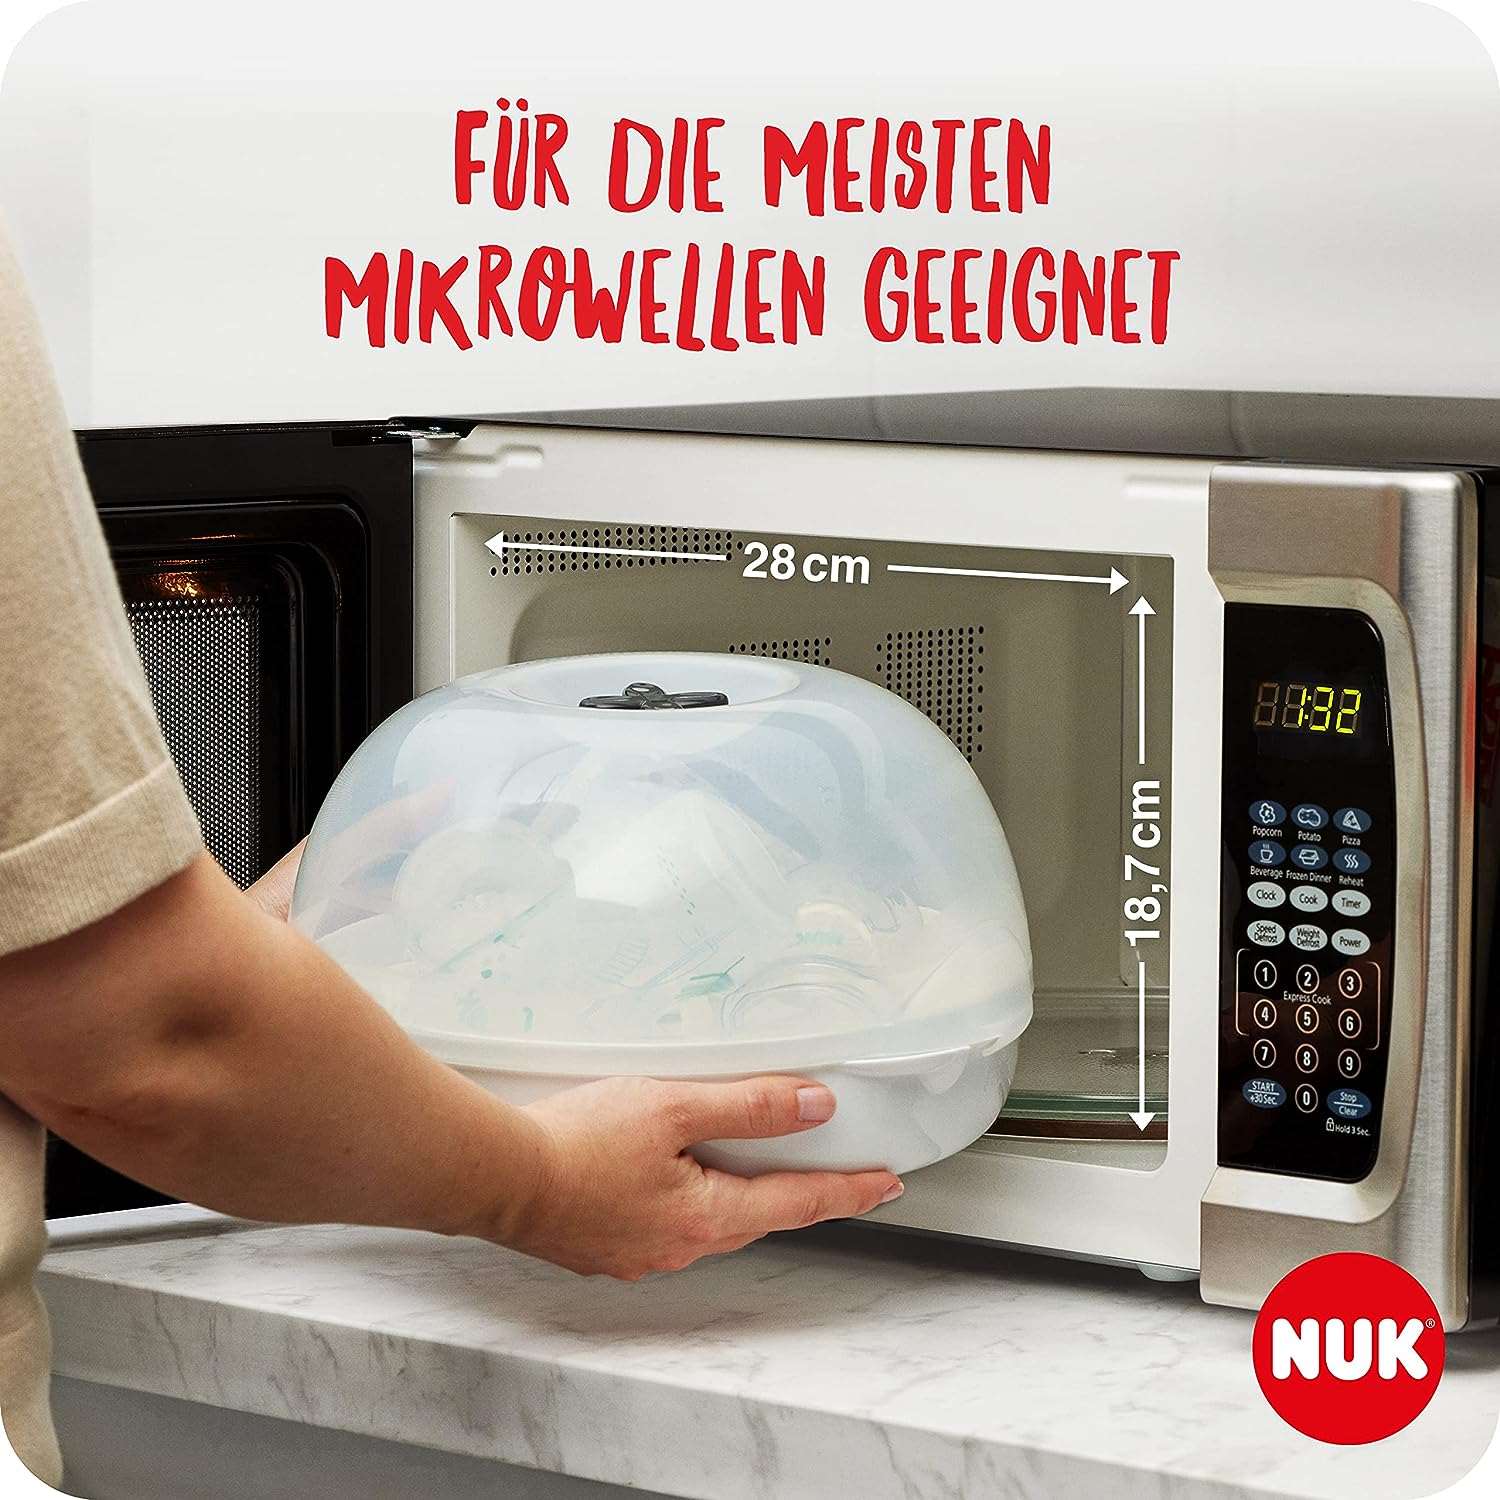 NUK - Micro Express Plus microwave sterilizer for baby bottles